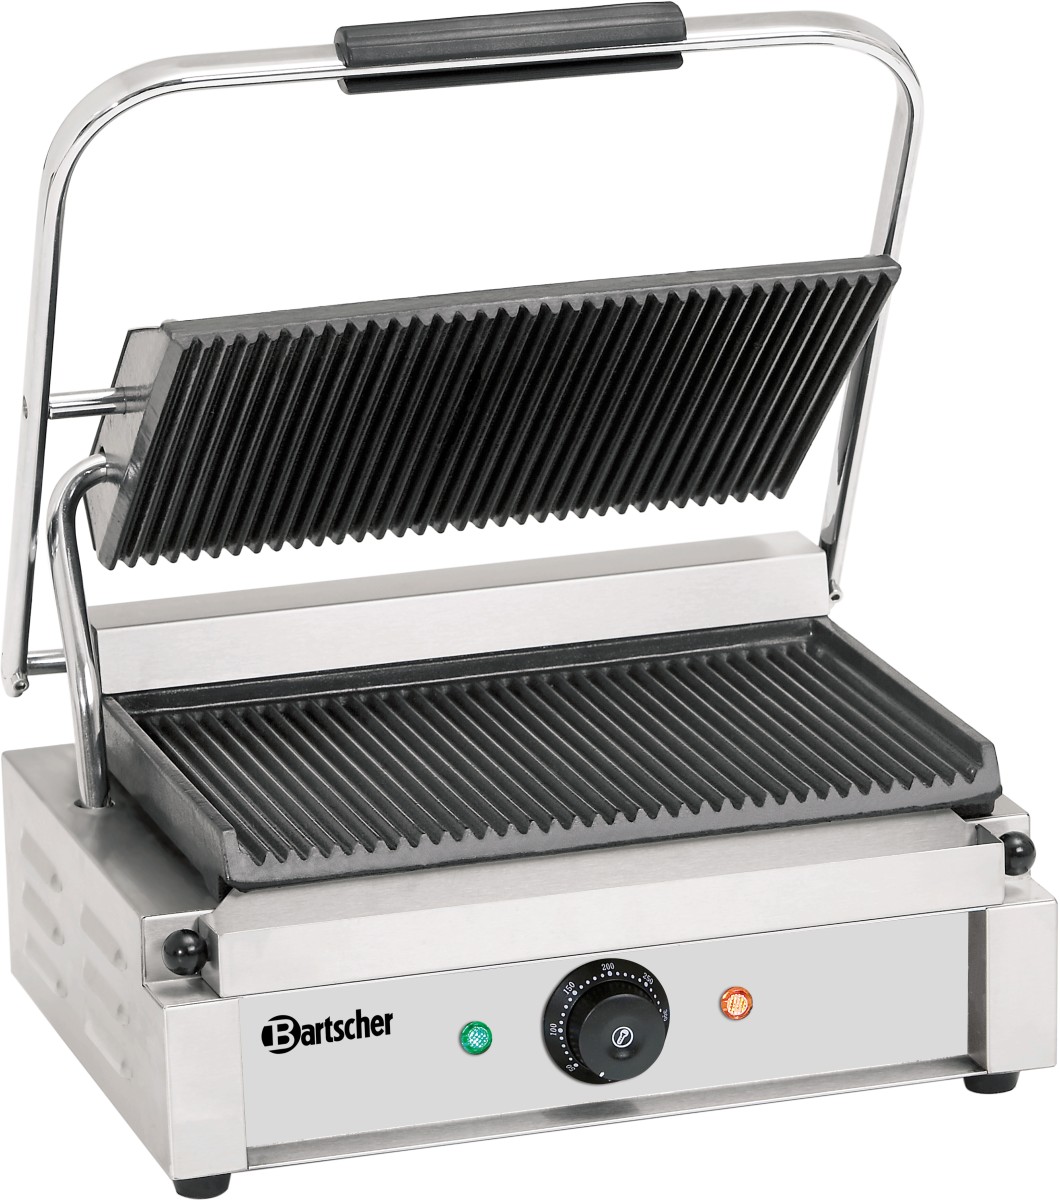  Bartscher Grill contact "Panini" 1R 